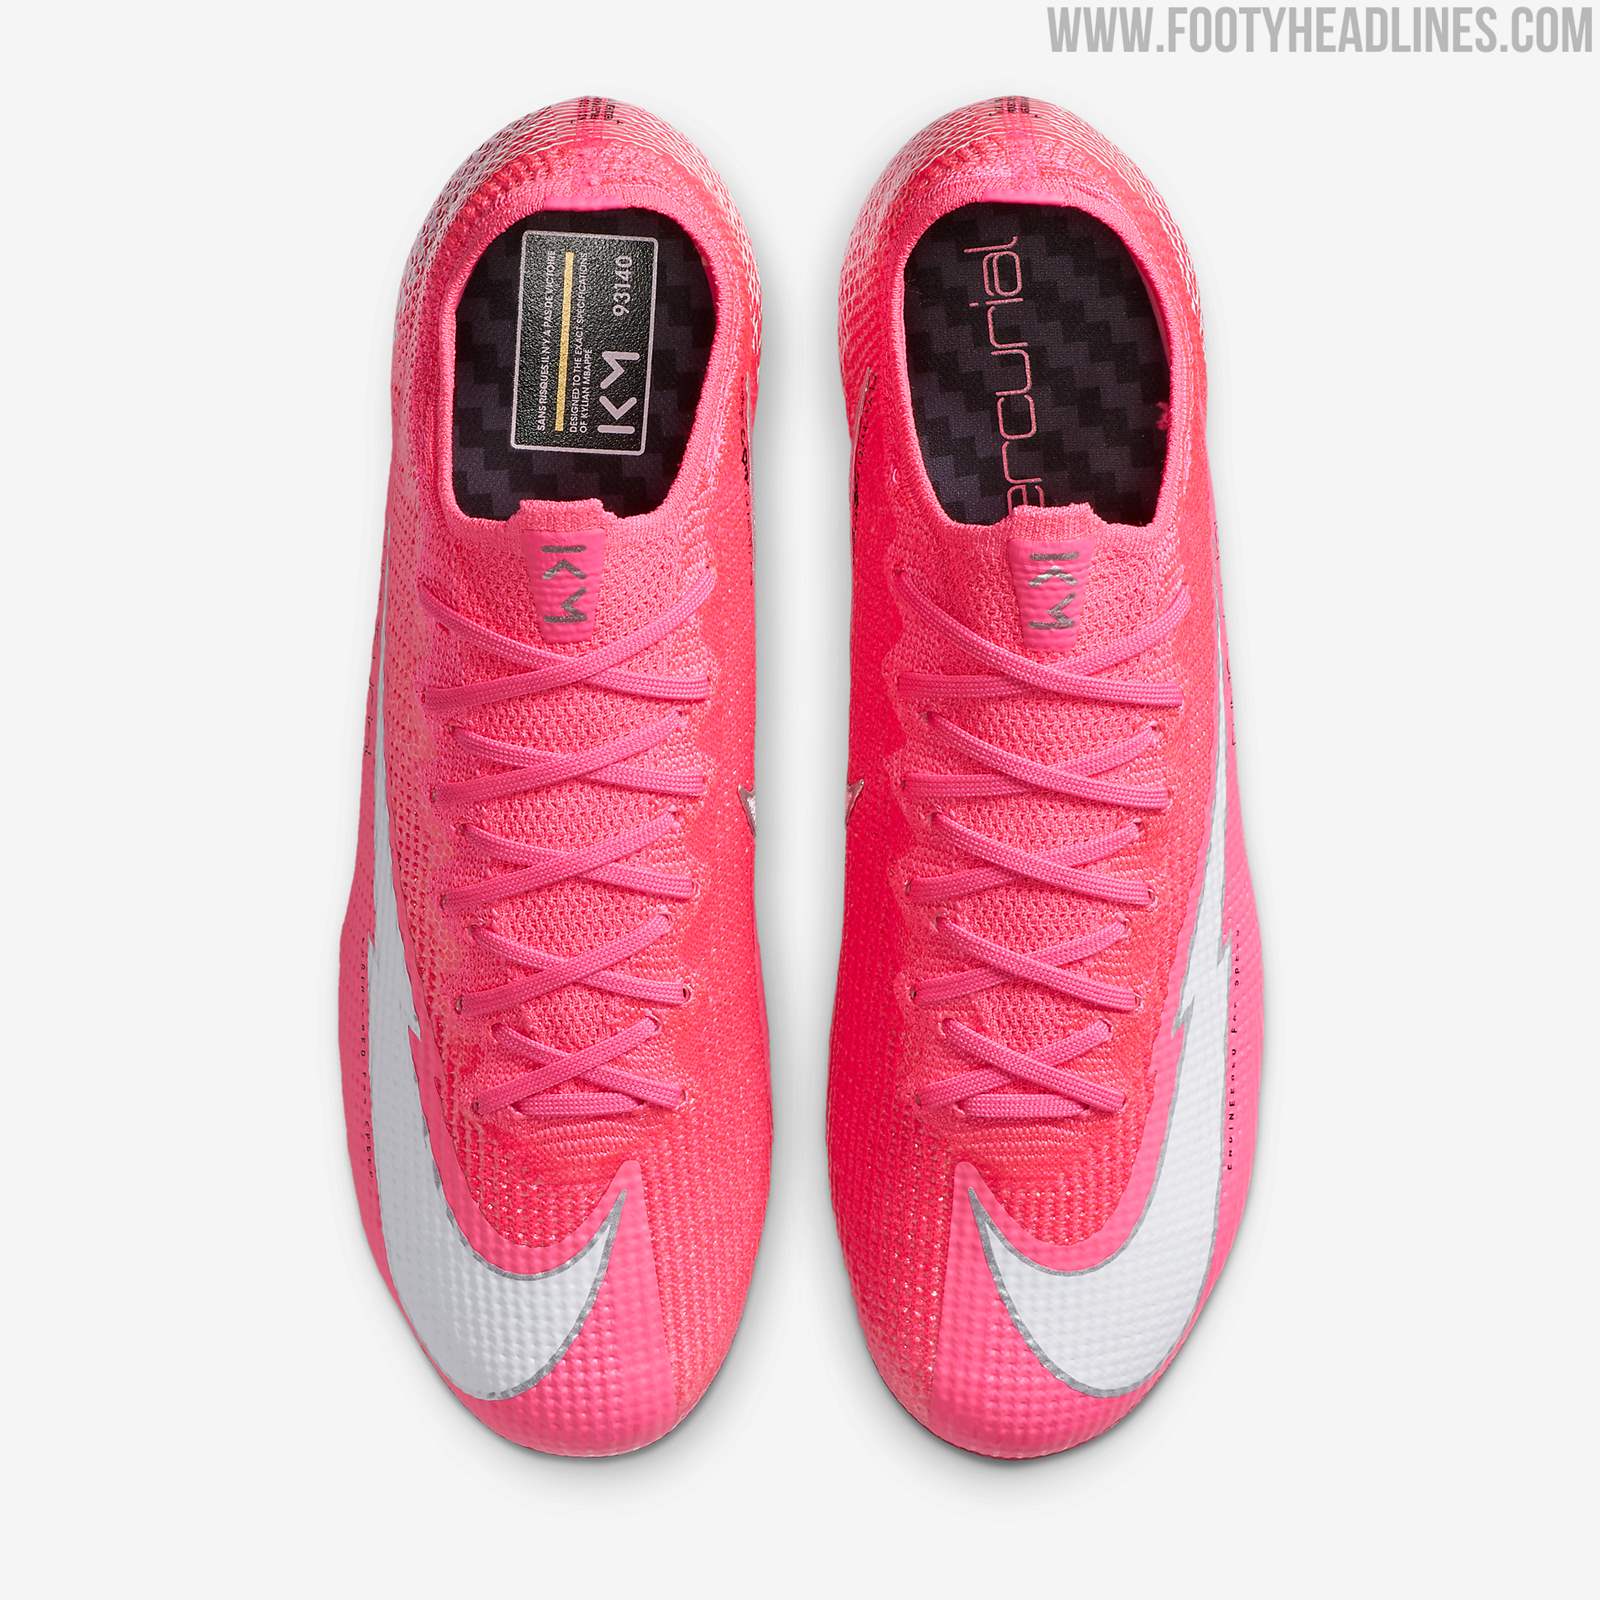 Nike Mercurial Mbappe Rosa 2020 Signature Boots Released - UCL Final ...